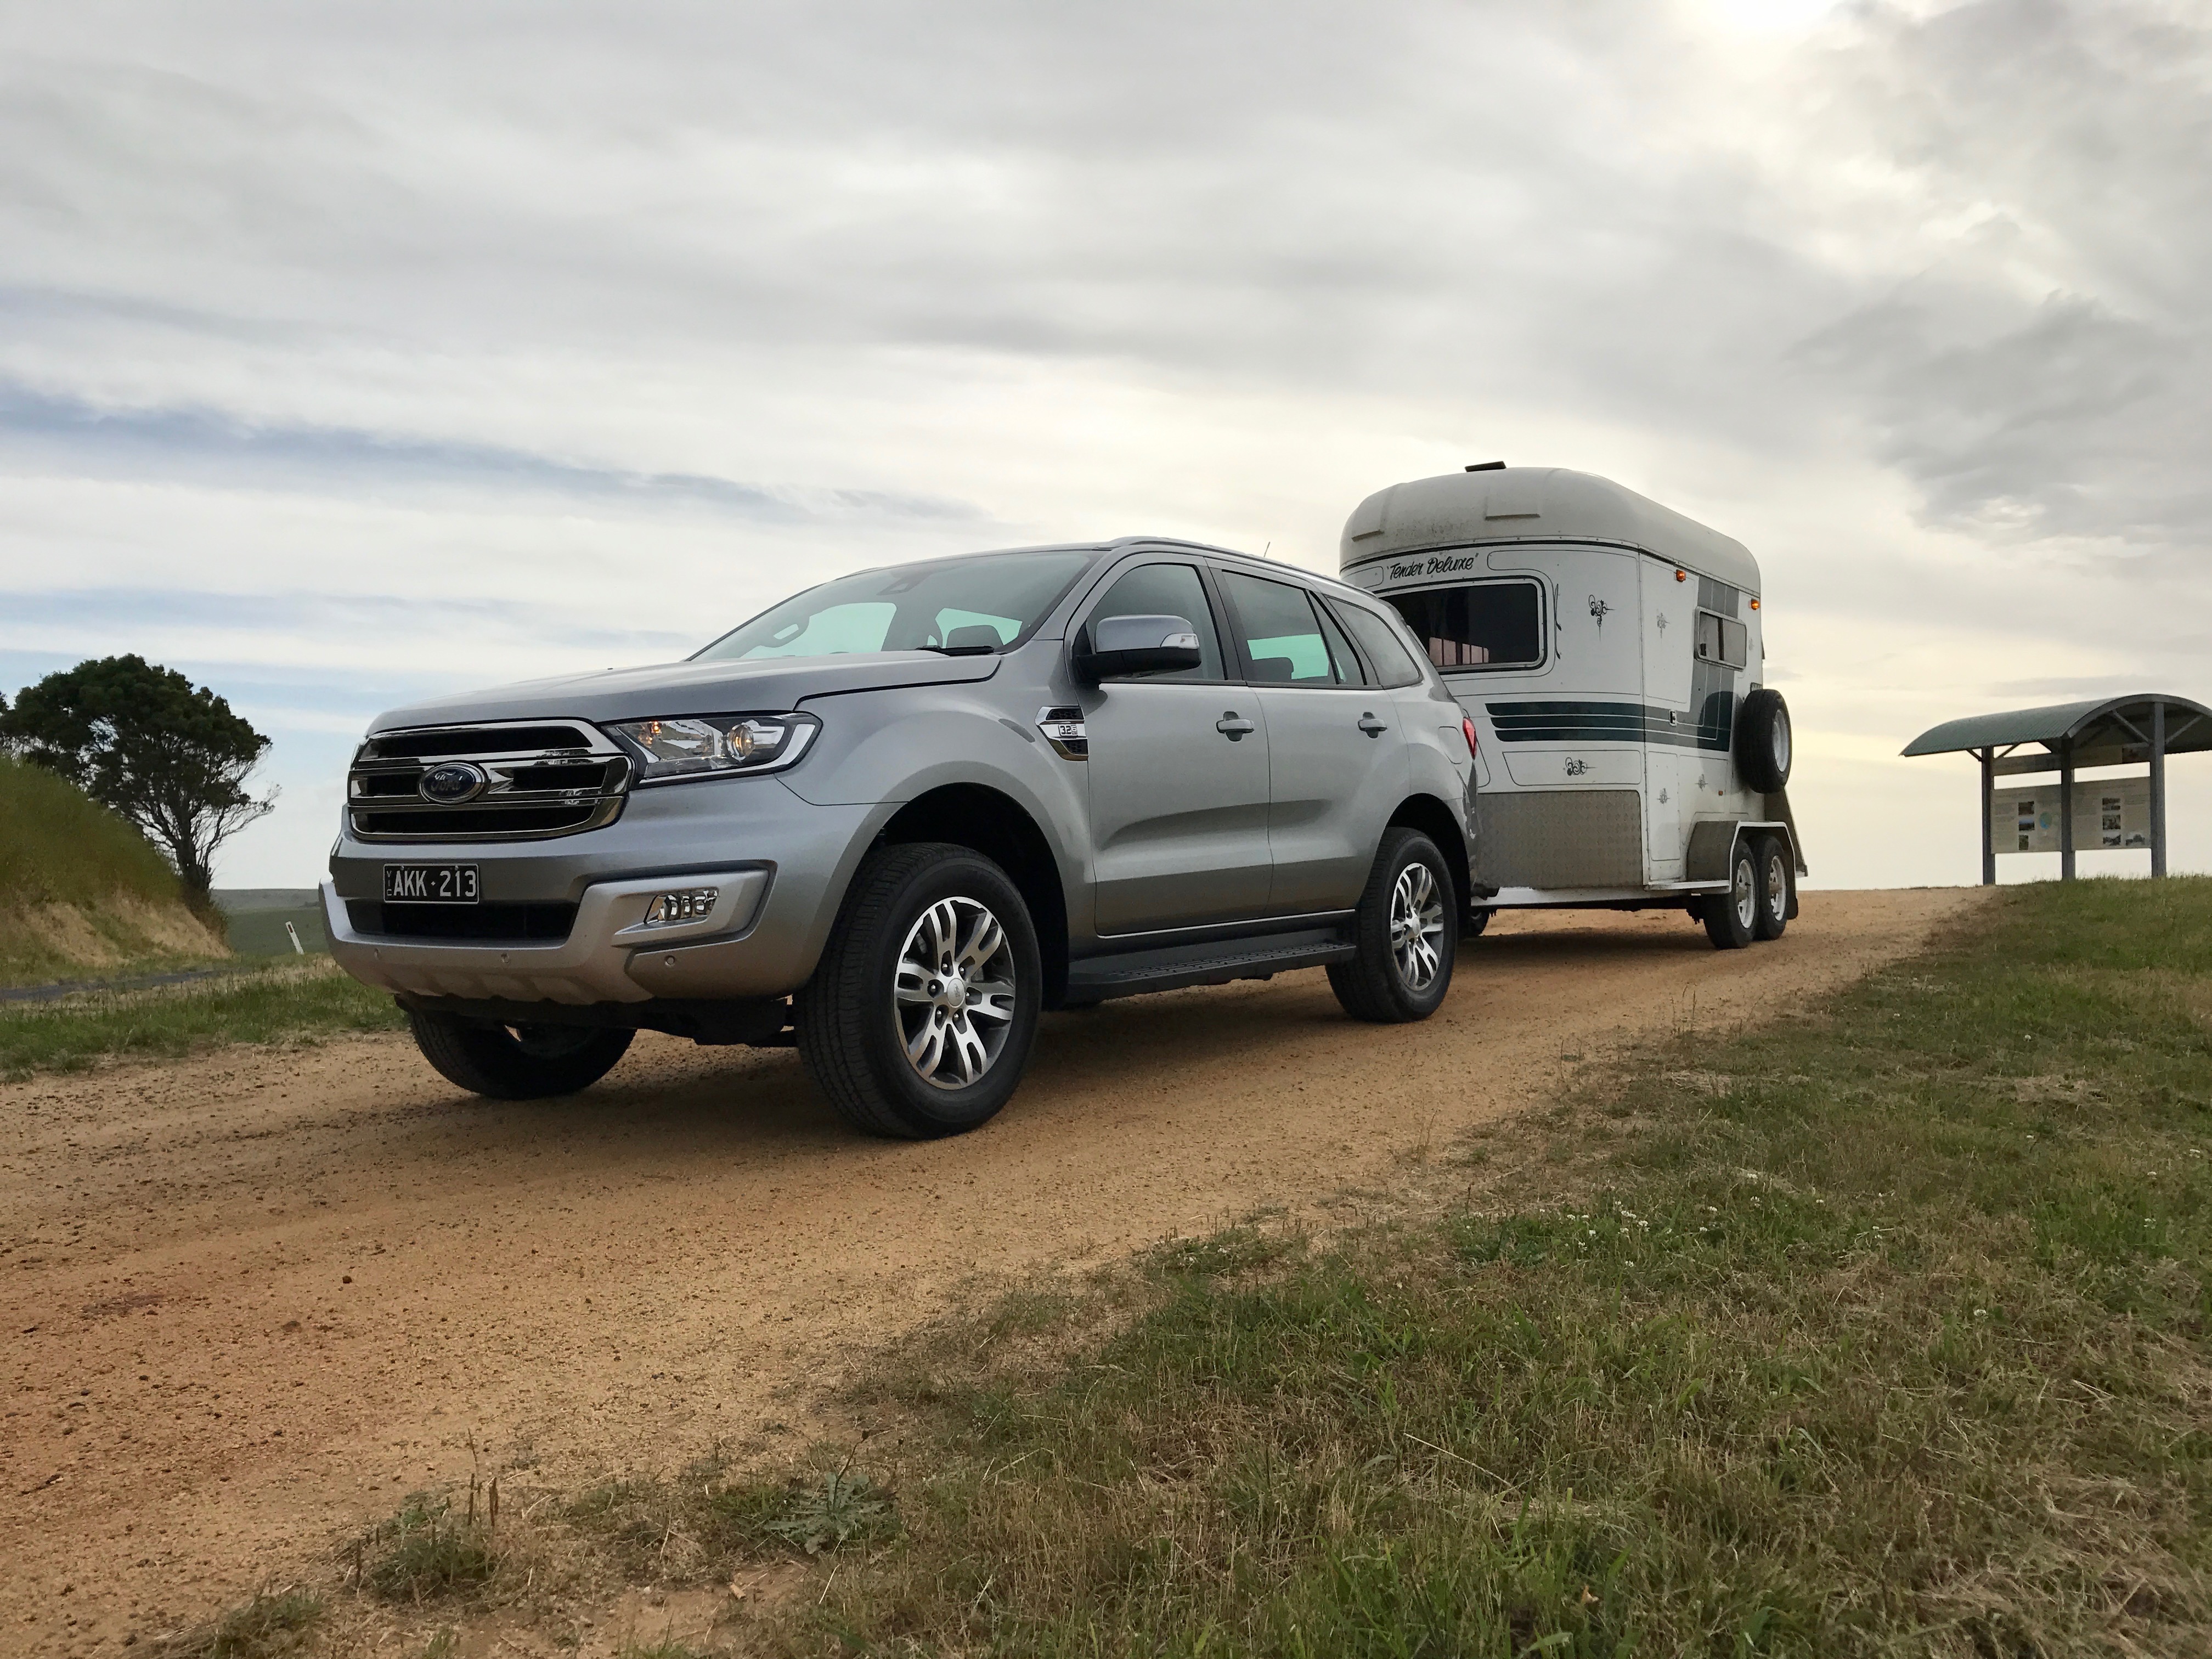 Ford Everest photos - PhotoGallery with 147 pics| CarsBase.com